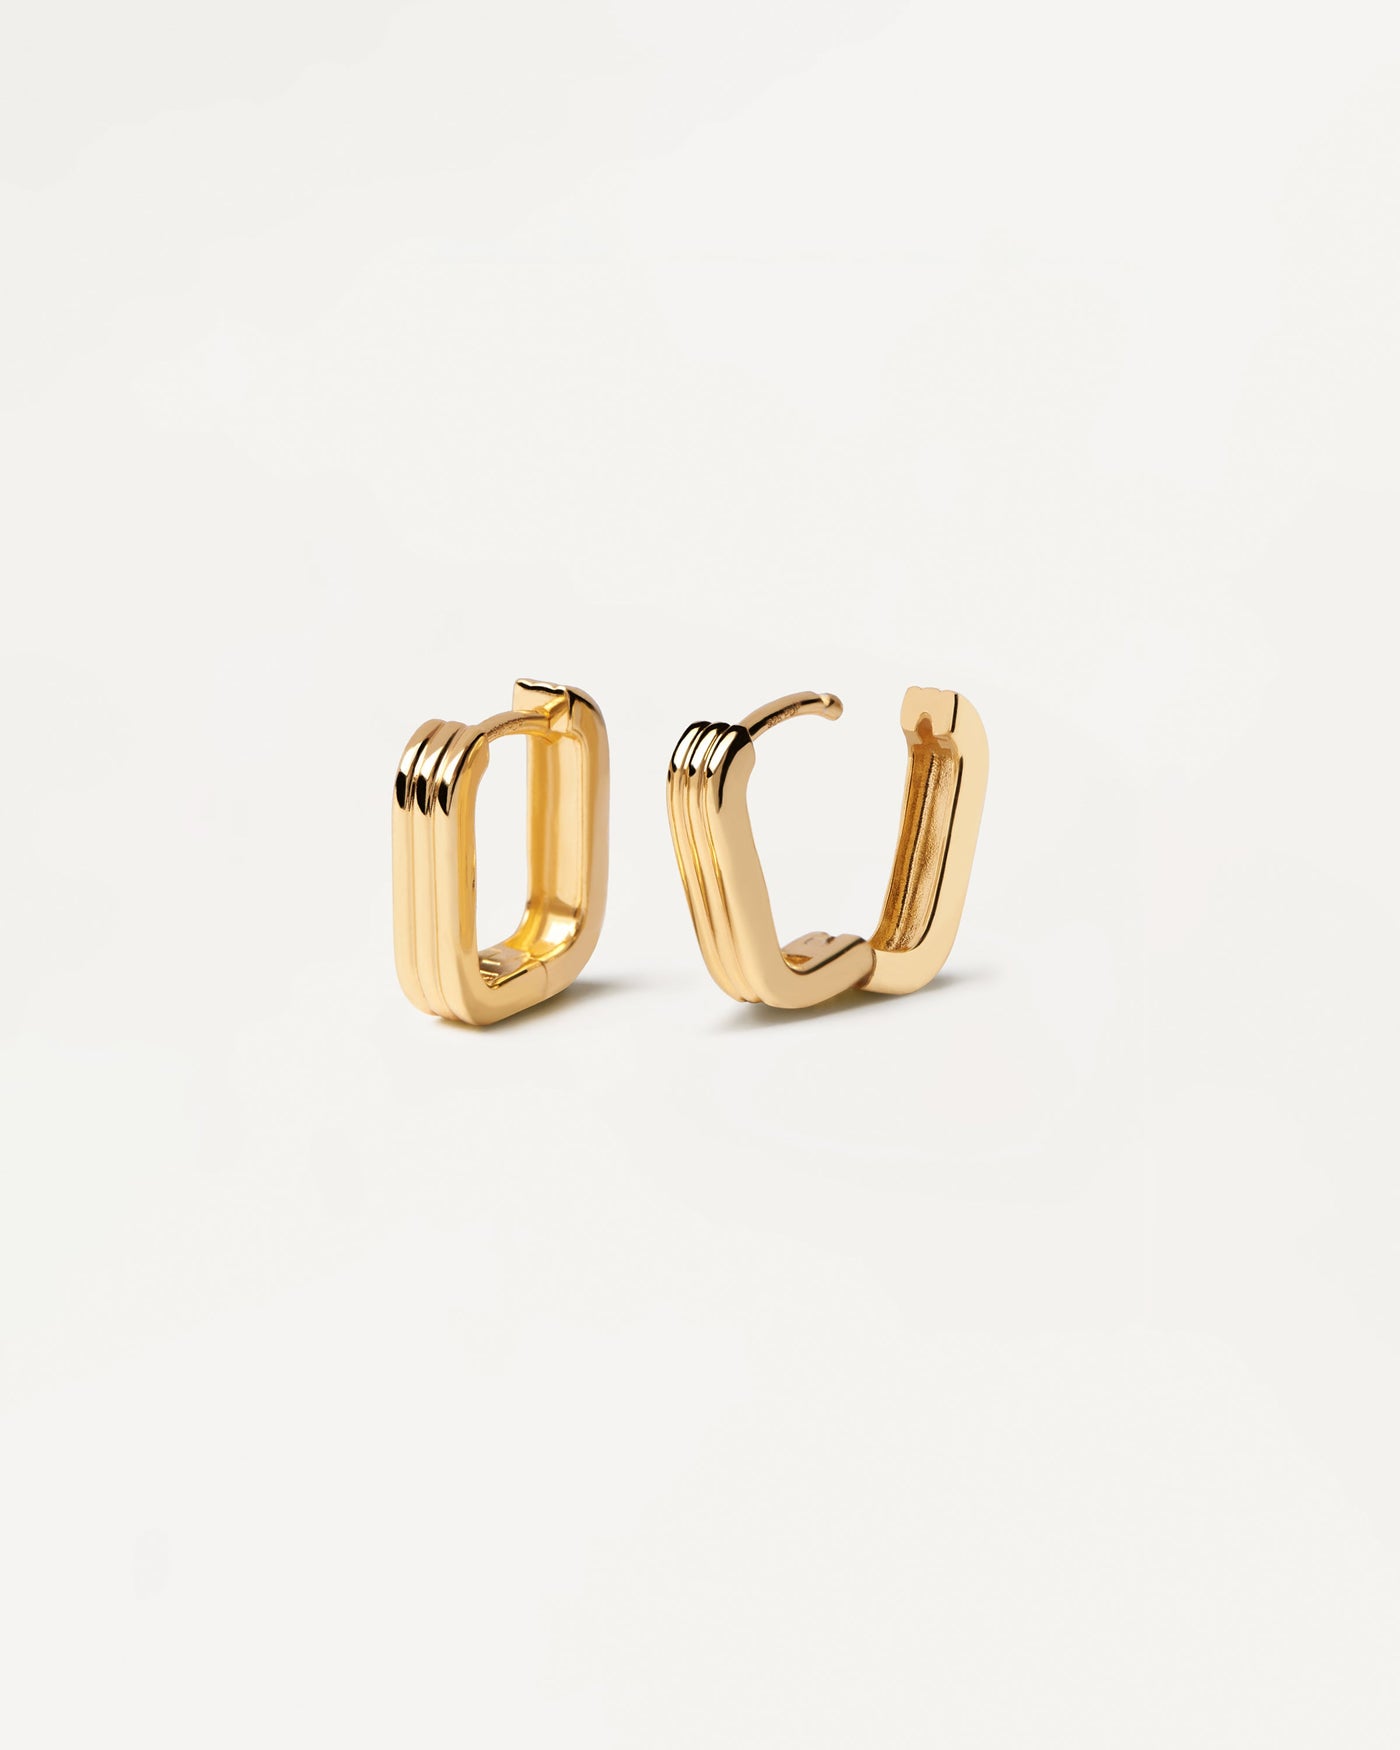 2023 Selection | Nova Earrings. Dainty squarred hoops in gold-plated silver with 3 bands design. Get the latest arrival from PDPAOLA. Place your order safely and get this Best Seller. Free Shipping.